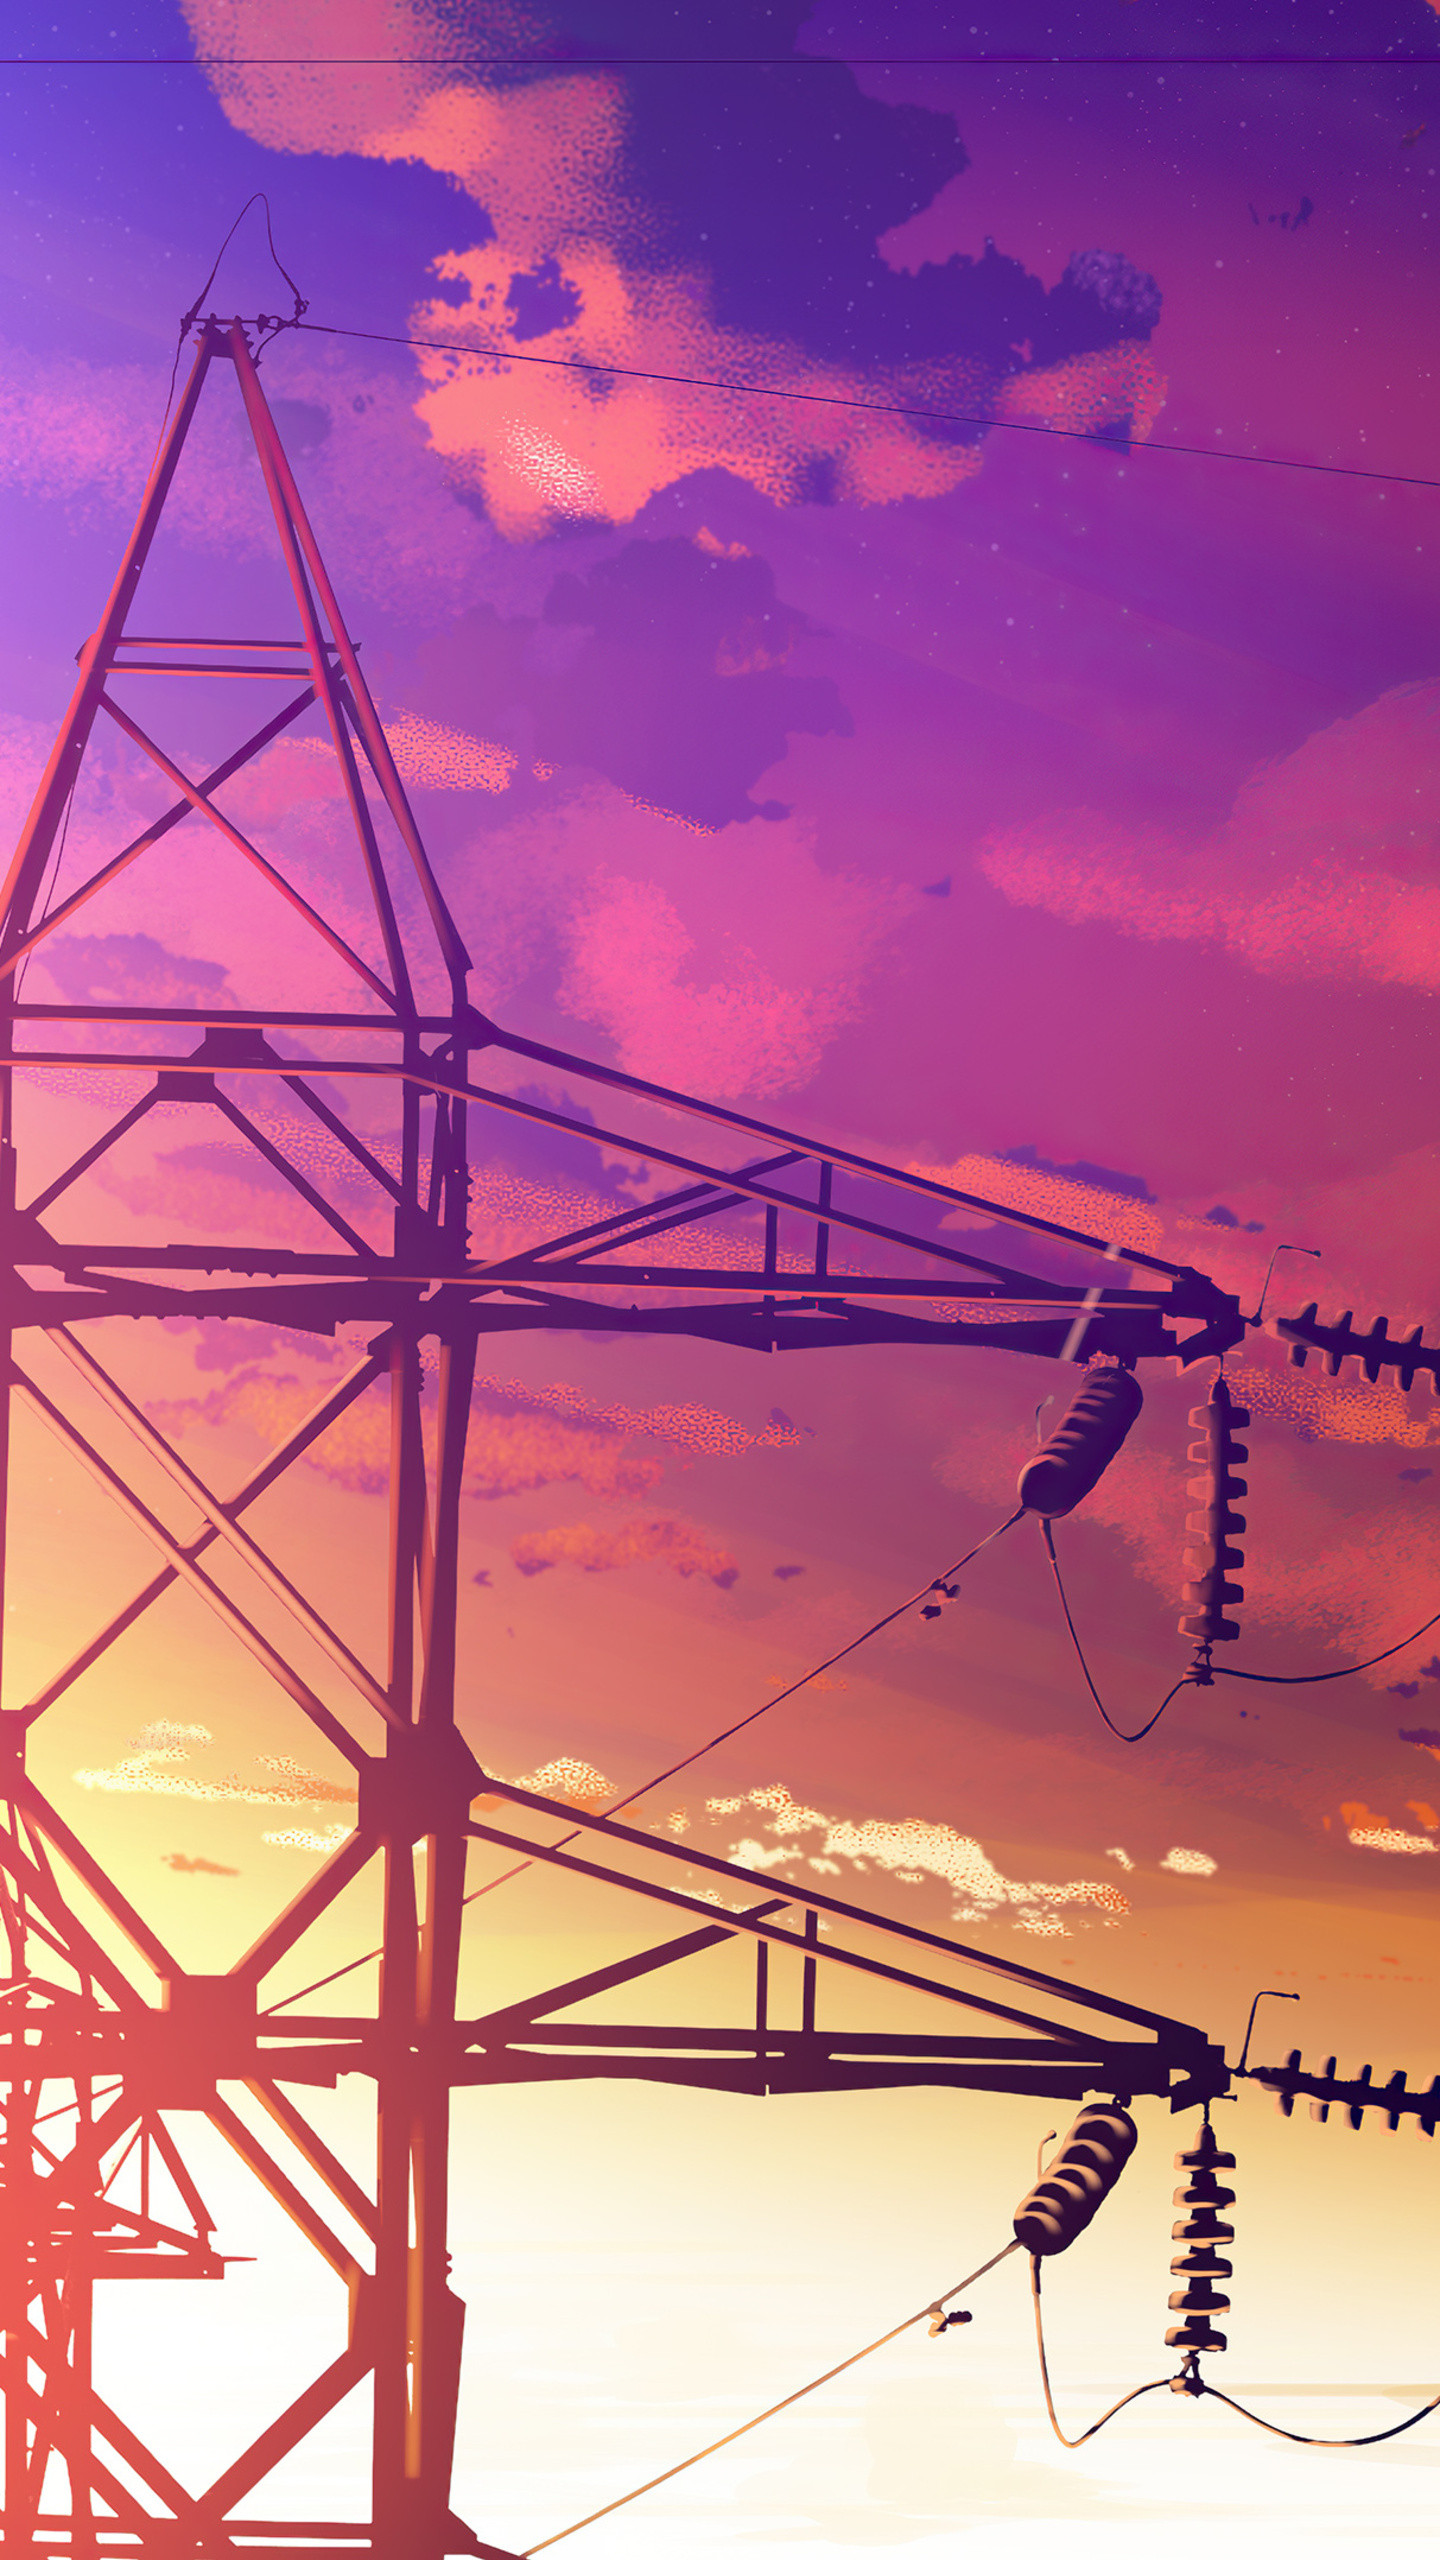 A digital painting of a power line against a purple and orange sky - Anime landscape